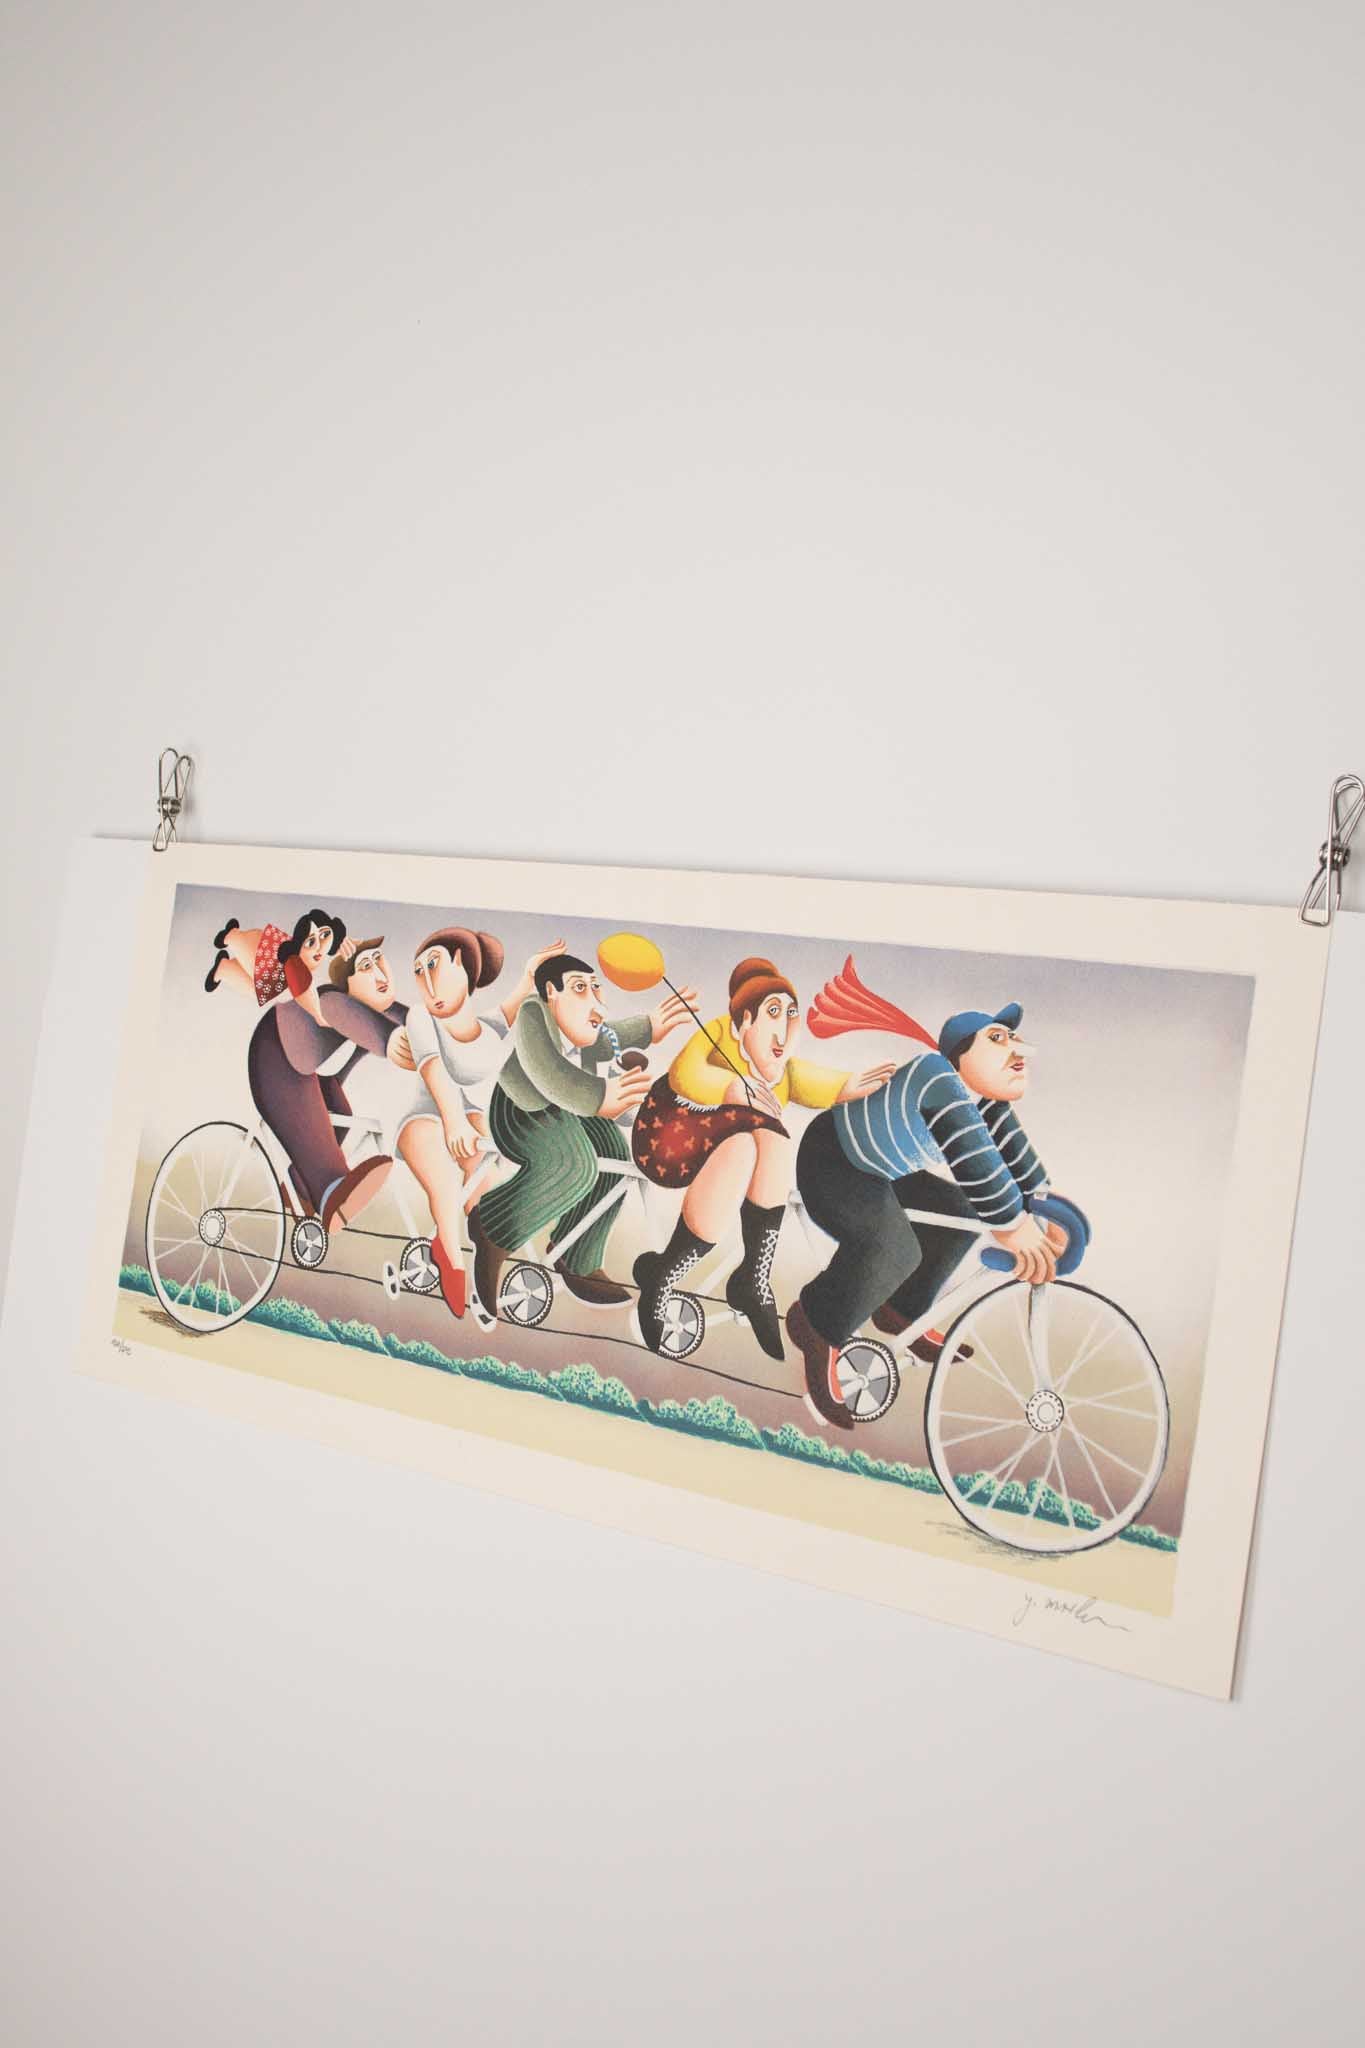 Yuval Mahler "Everyone is on the Bike" Lithograph Print